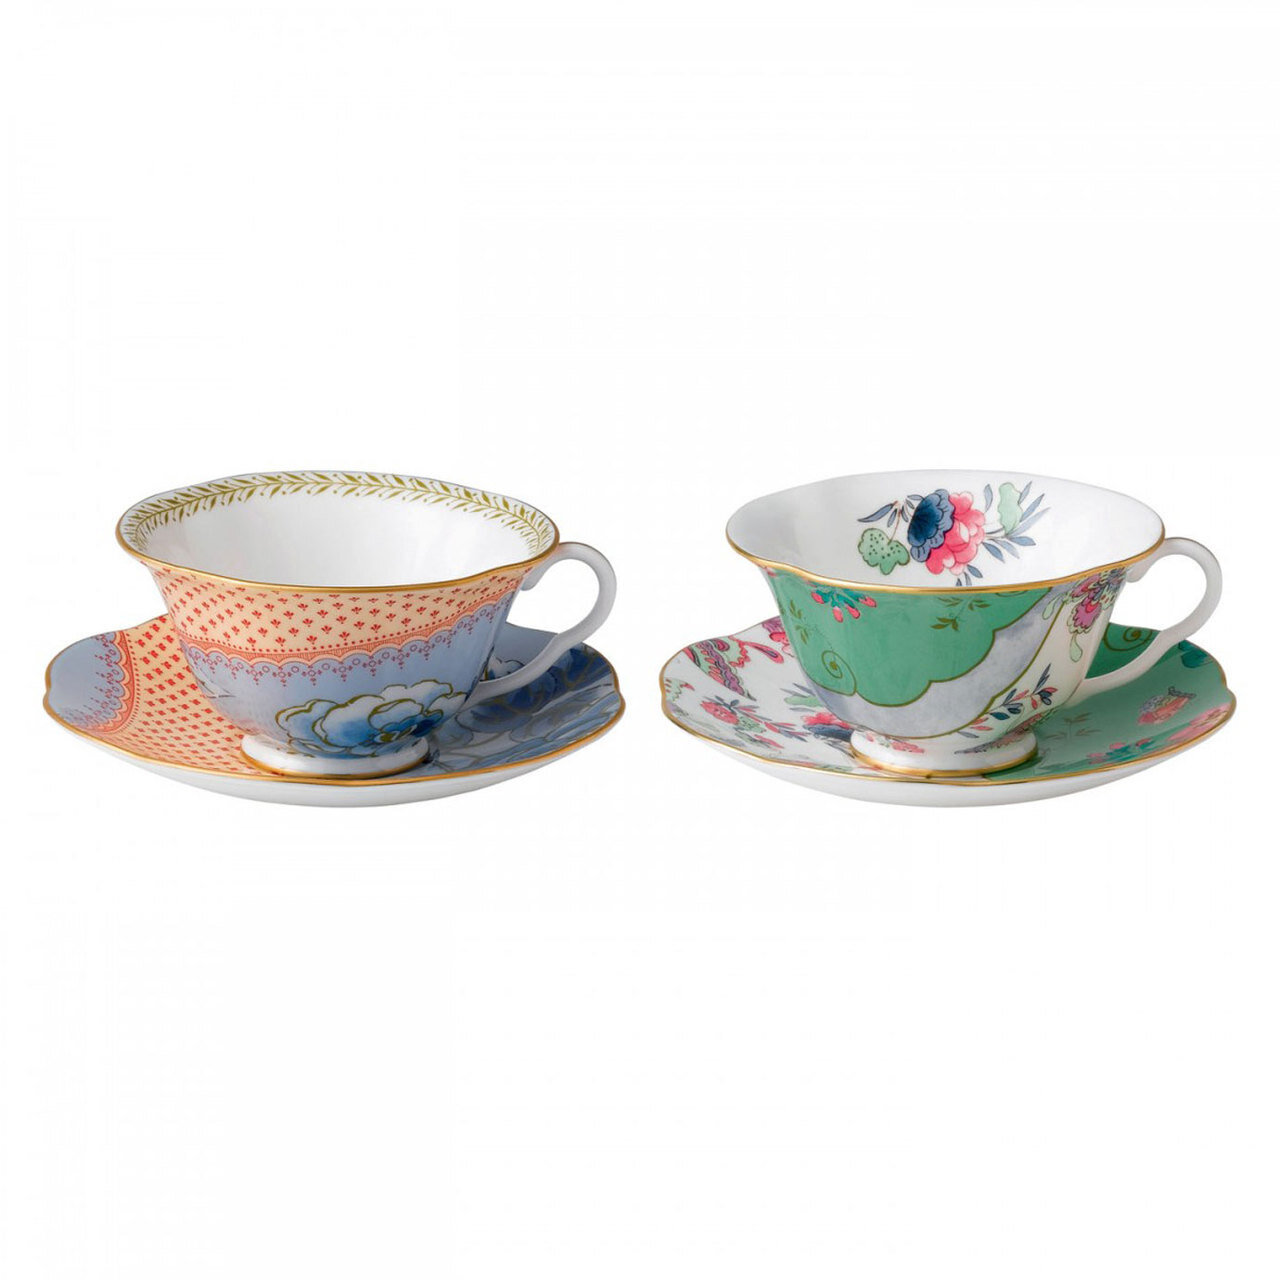 Wedgwood Butterfly Bloom Teacup and Saucer Set of Two Blue Peony and Butterfly Posy